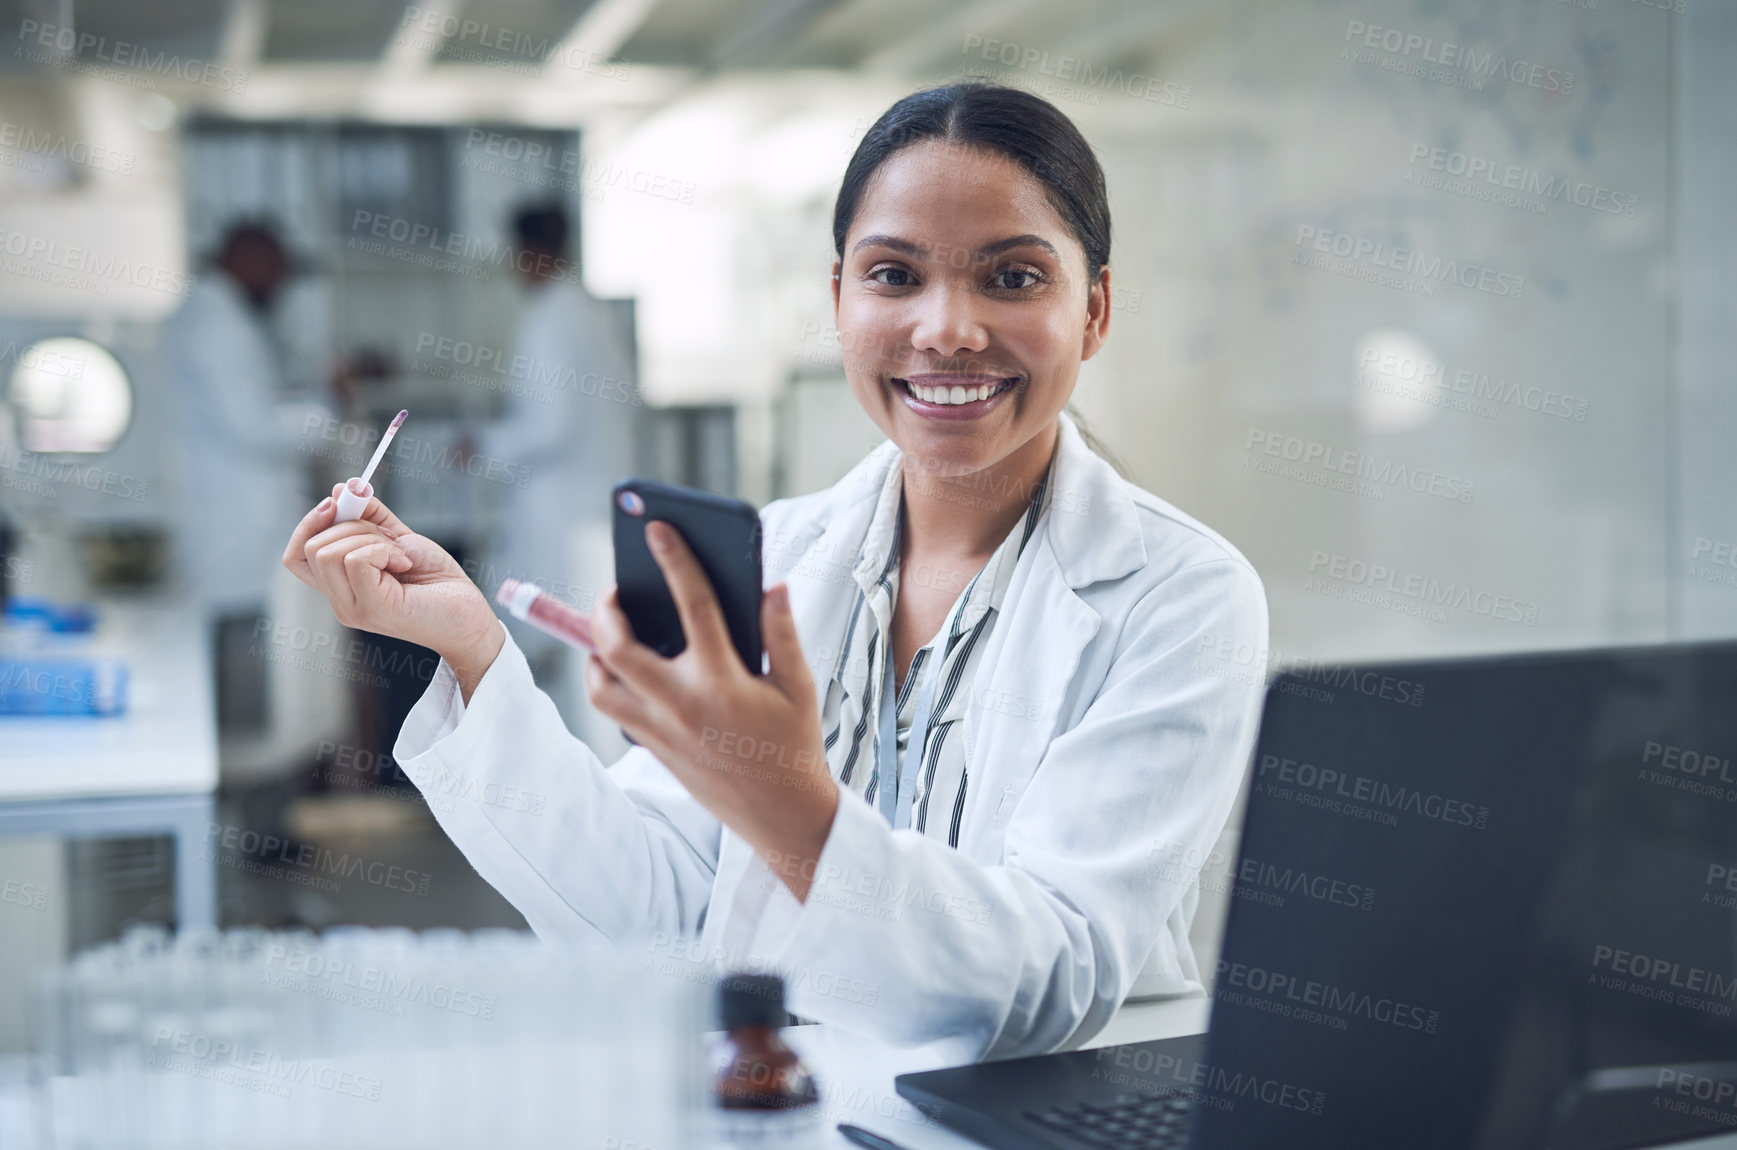 Buy stock photo Shot of a young scientist applying makeup using a smartphone while conducting research in a laboratory